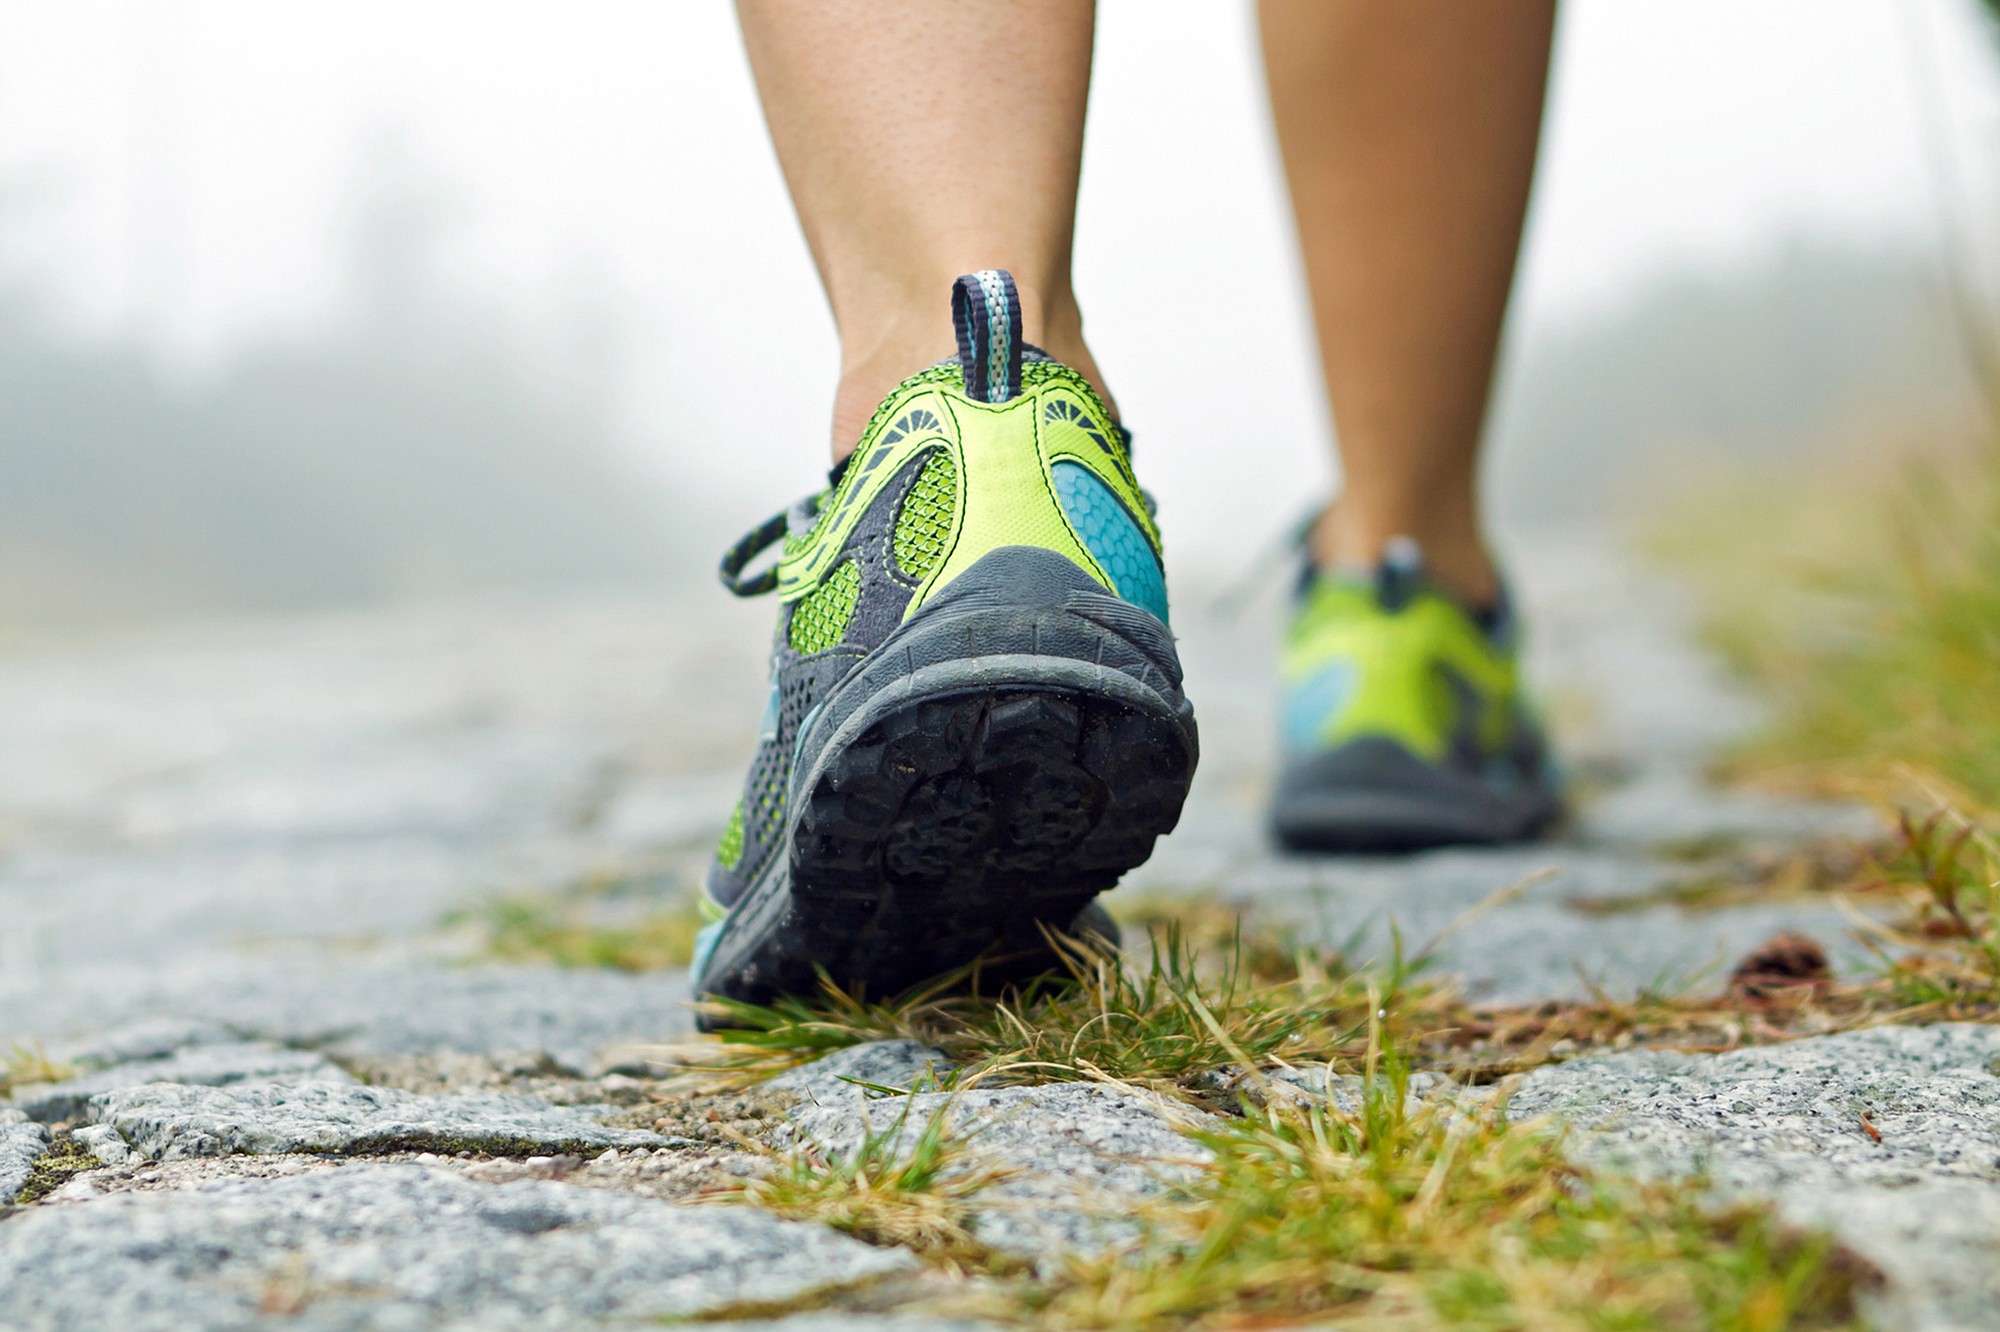 Fotolia
Walking is a fast, easy way to get some exercise and improve your health.